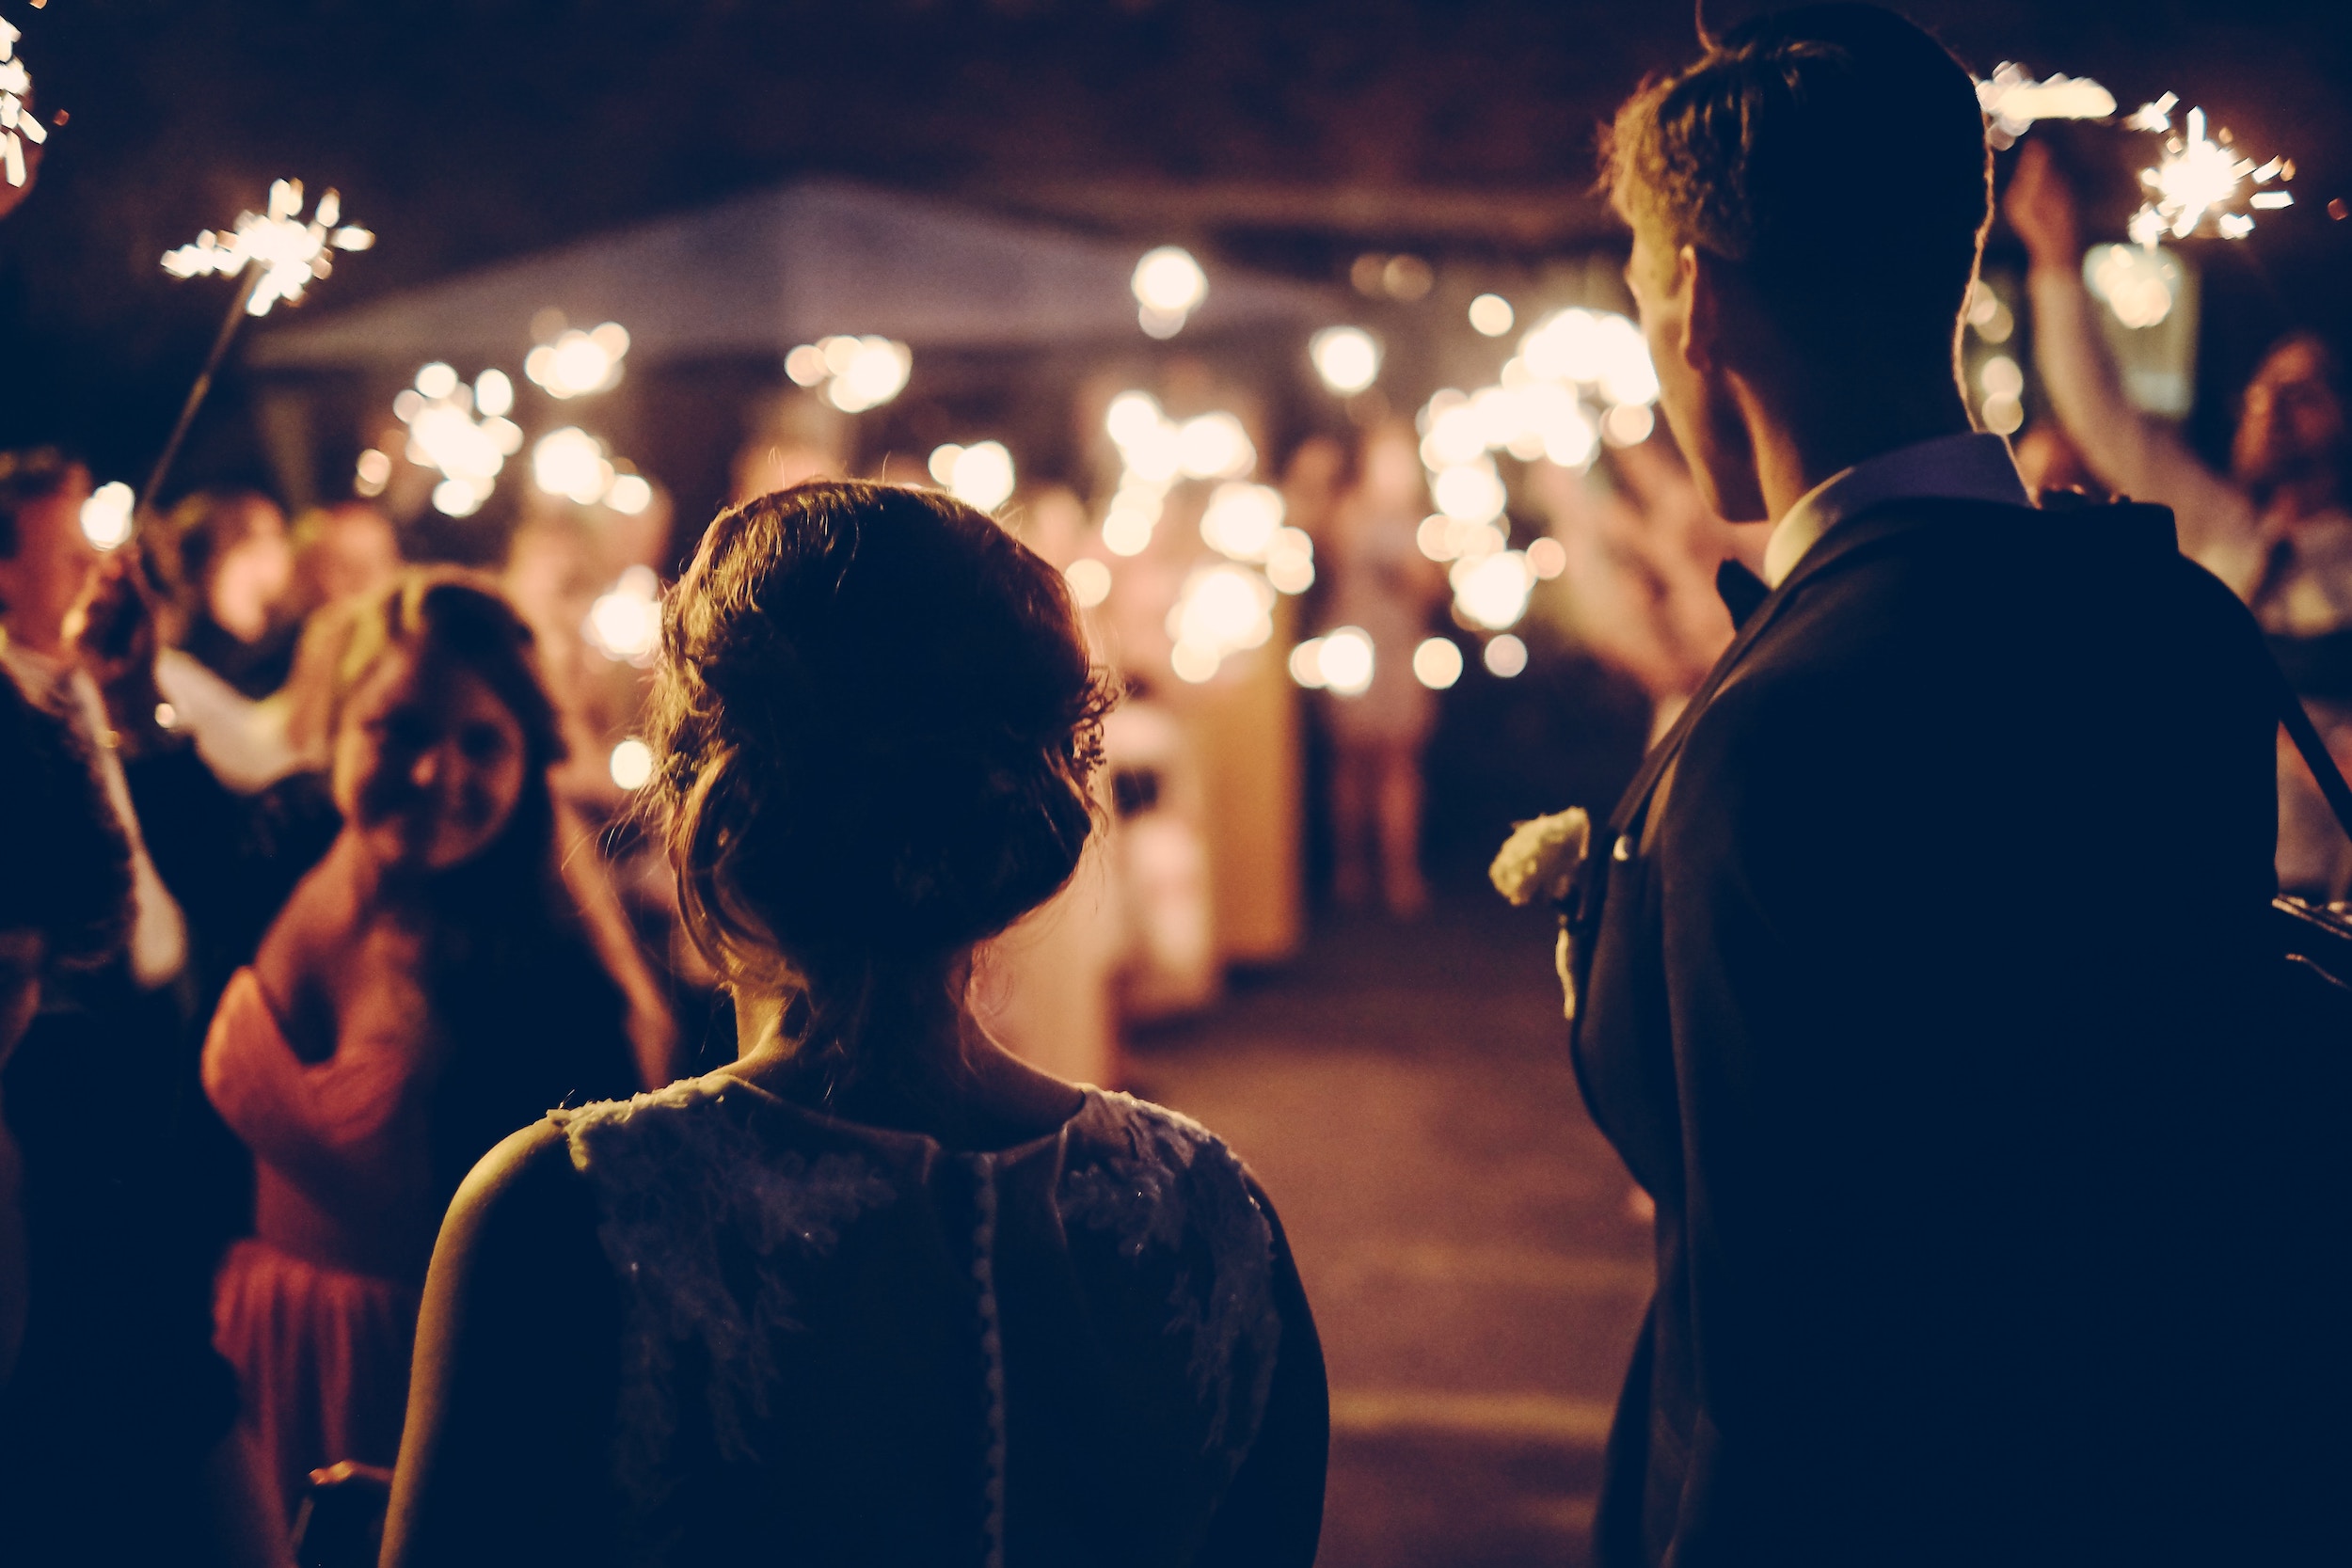 A bride and groom stand facing a joyous crowd of guests holding up lit sparklers at an evening outdoor wedding reception, creating a warm and festive atmosphere.